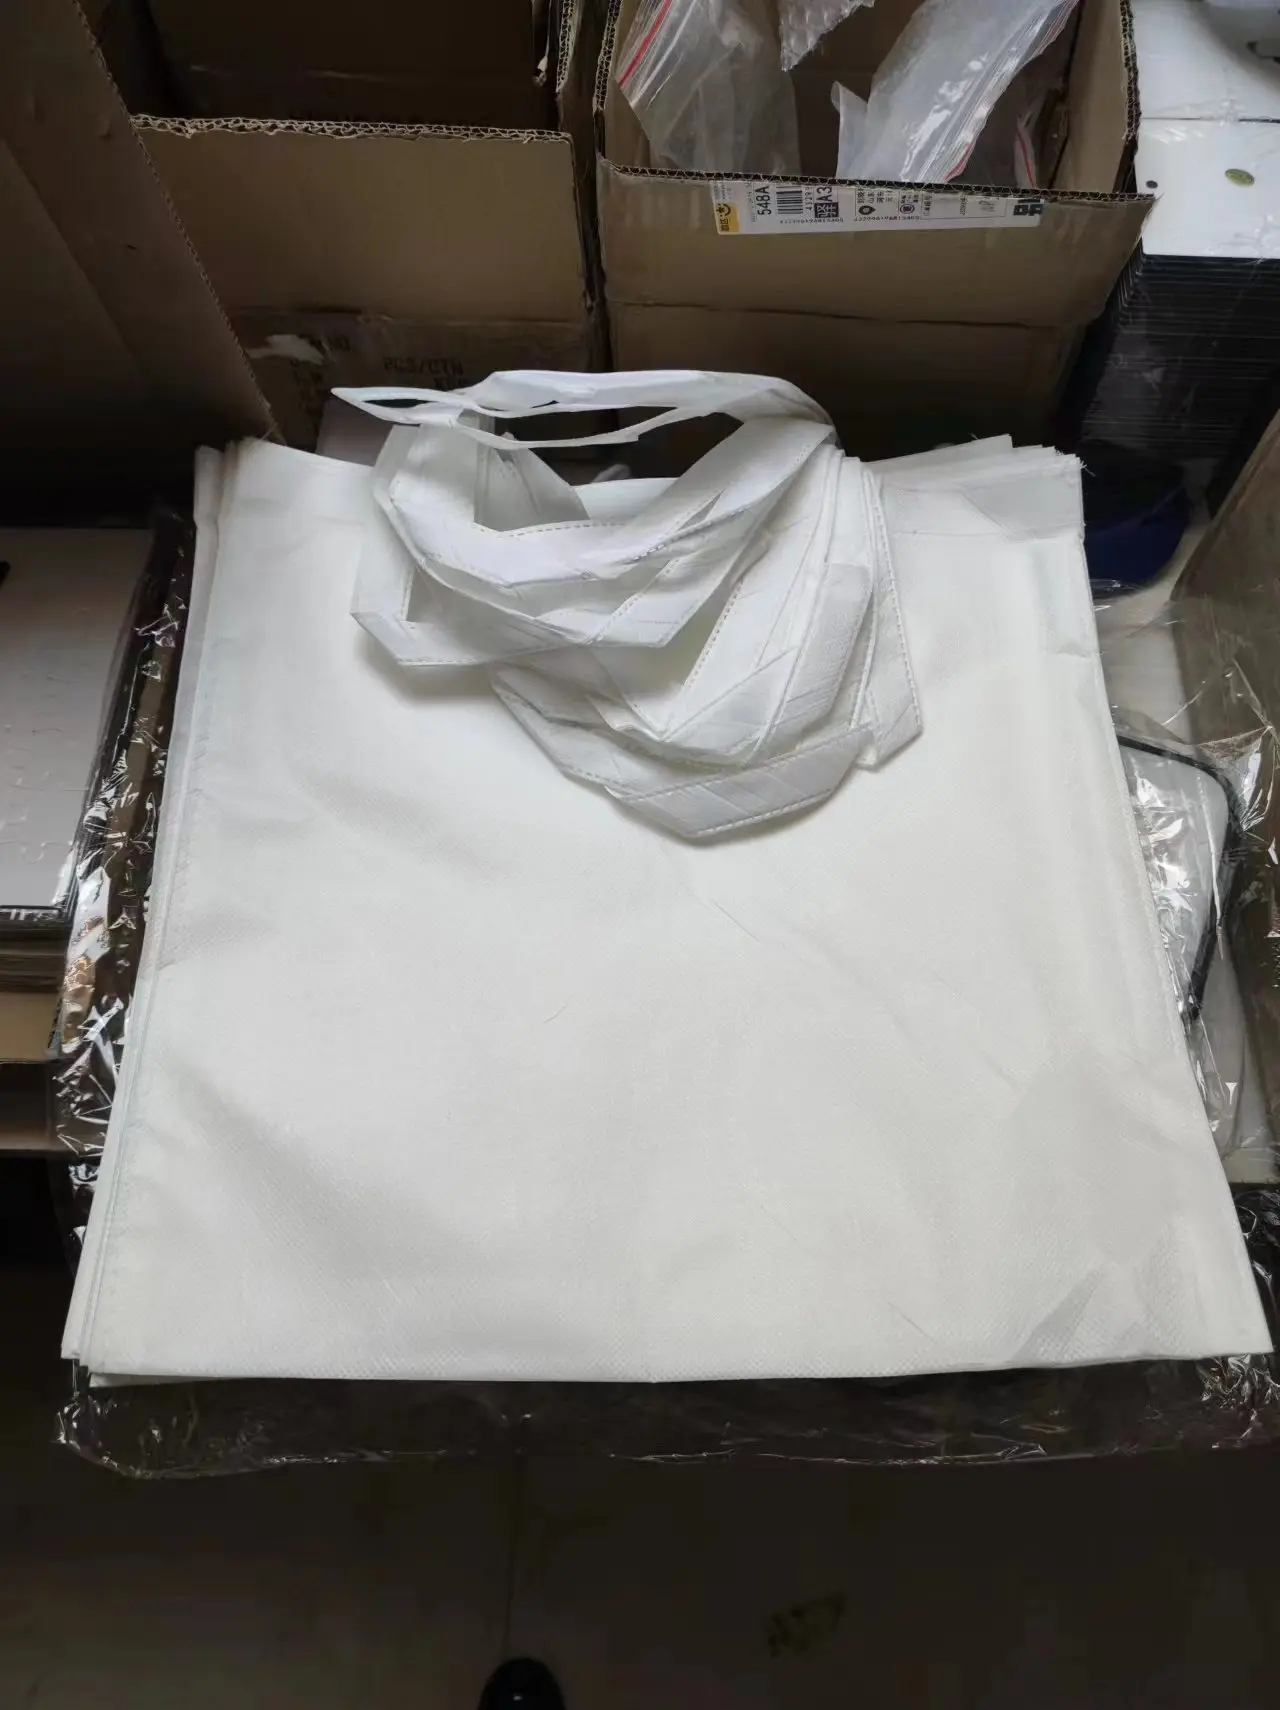 Free Shipping 20pcs/lot  Blank Non-woven Fabrics Bags Packet For Sublimation Printing by Flat Heat Press DIY 38x40.6cm ribbon shopping handle bags small size paper bag customized printing logo shipping packages